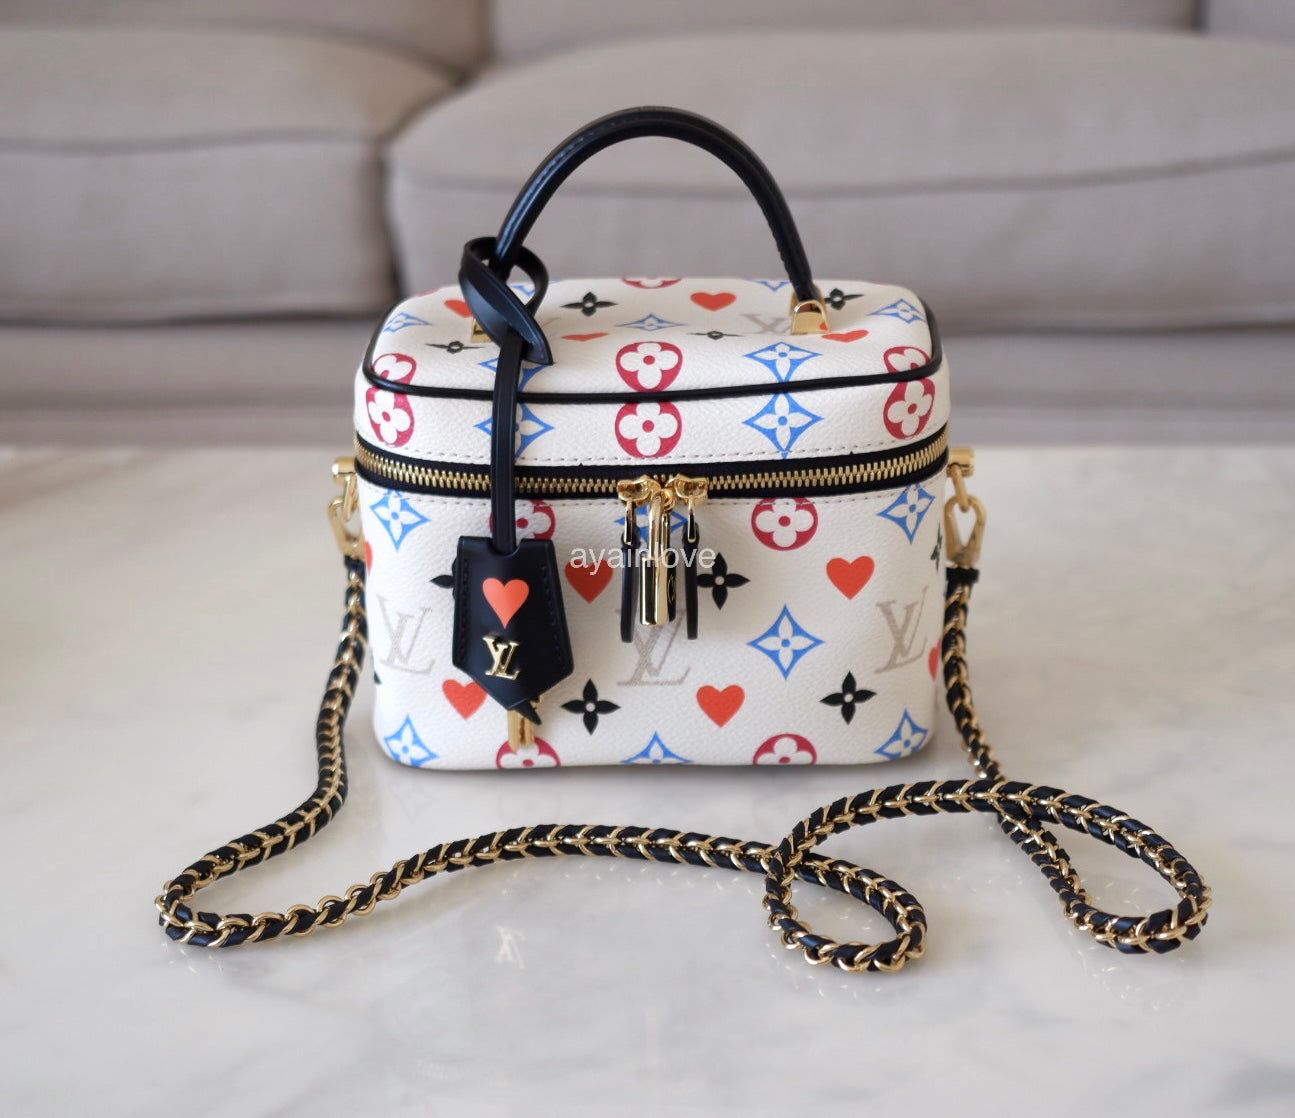 Louis Vuitton Pre-Loved Game On Vanity PM bag for Women - Multicolored in  UAE